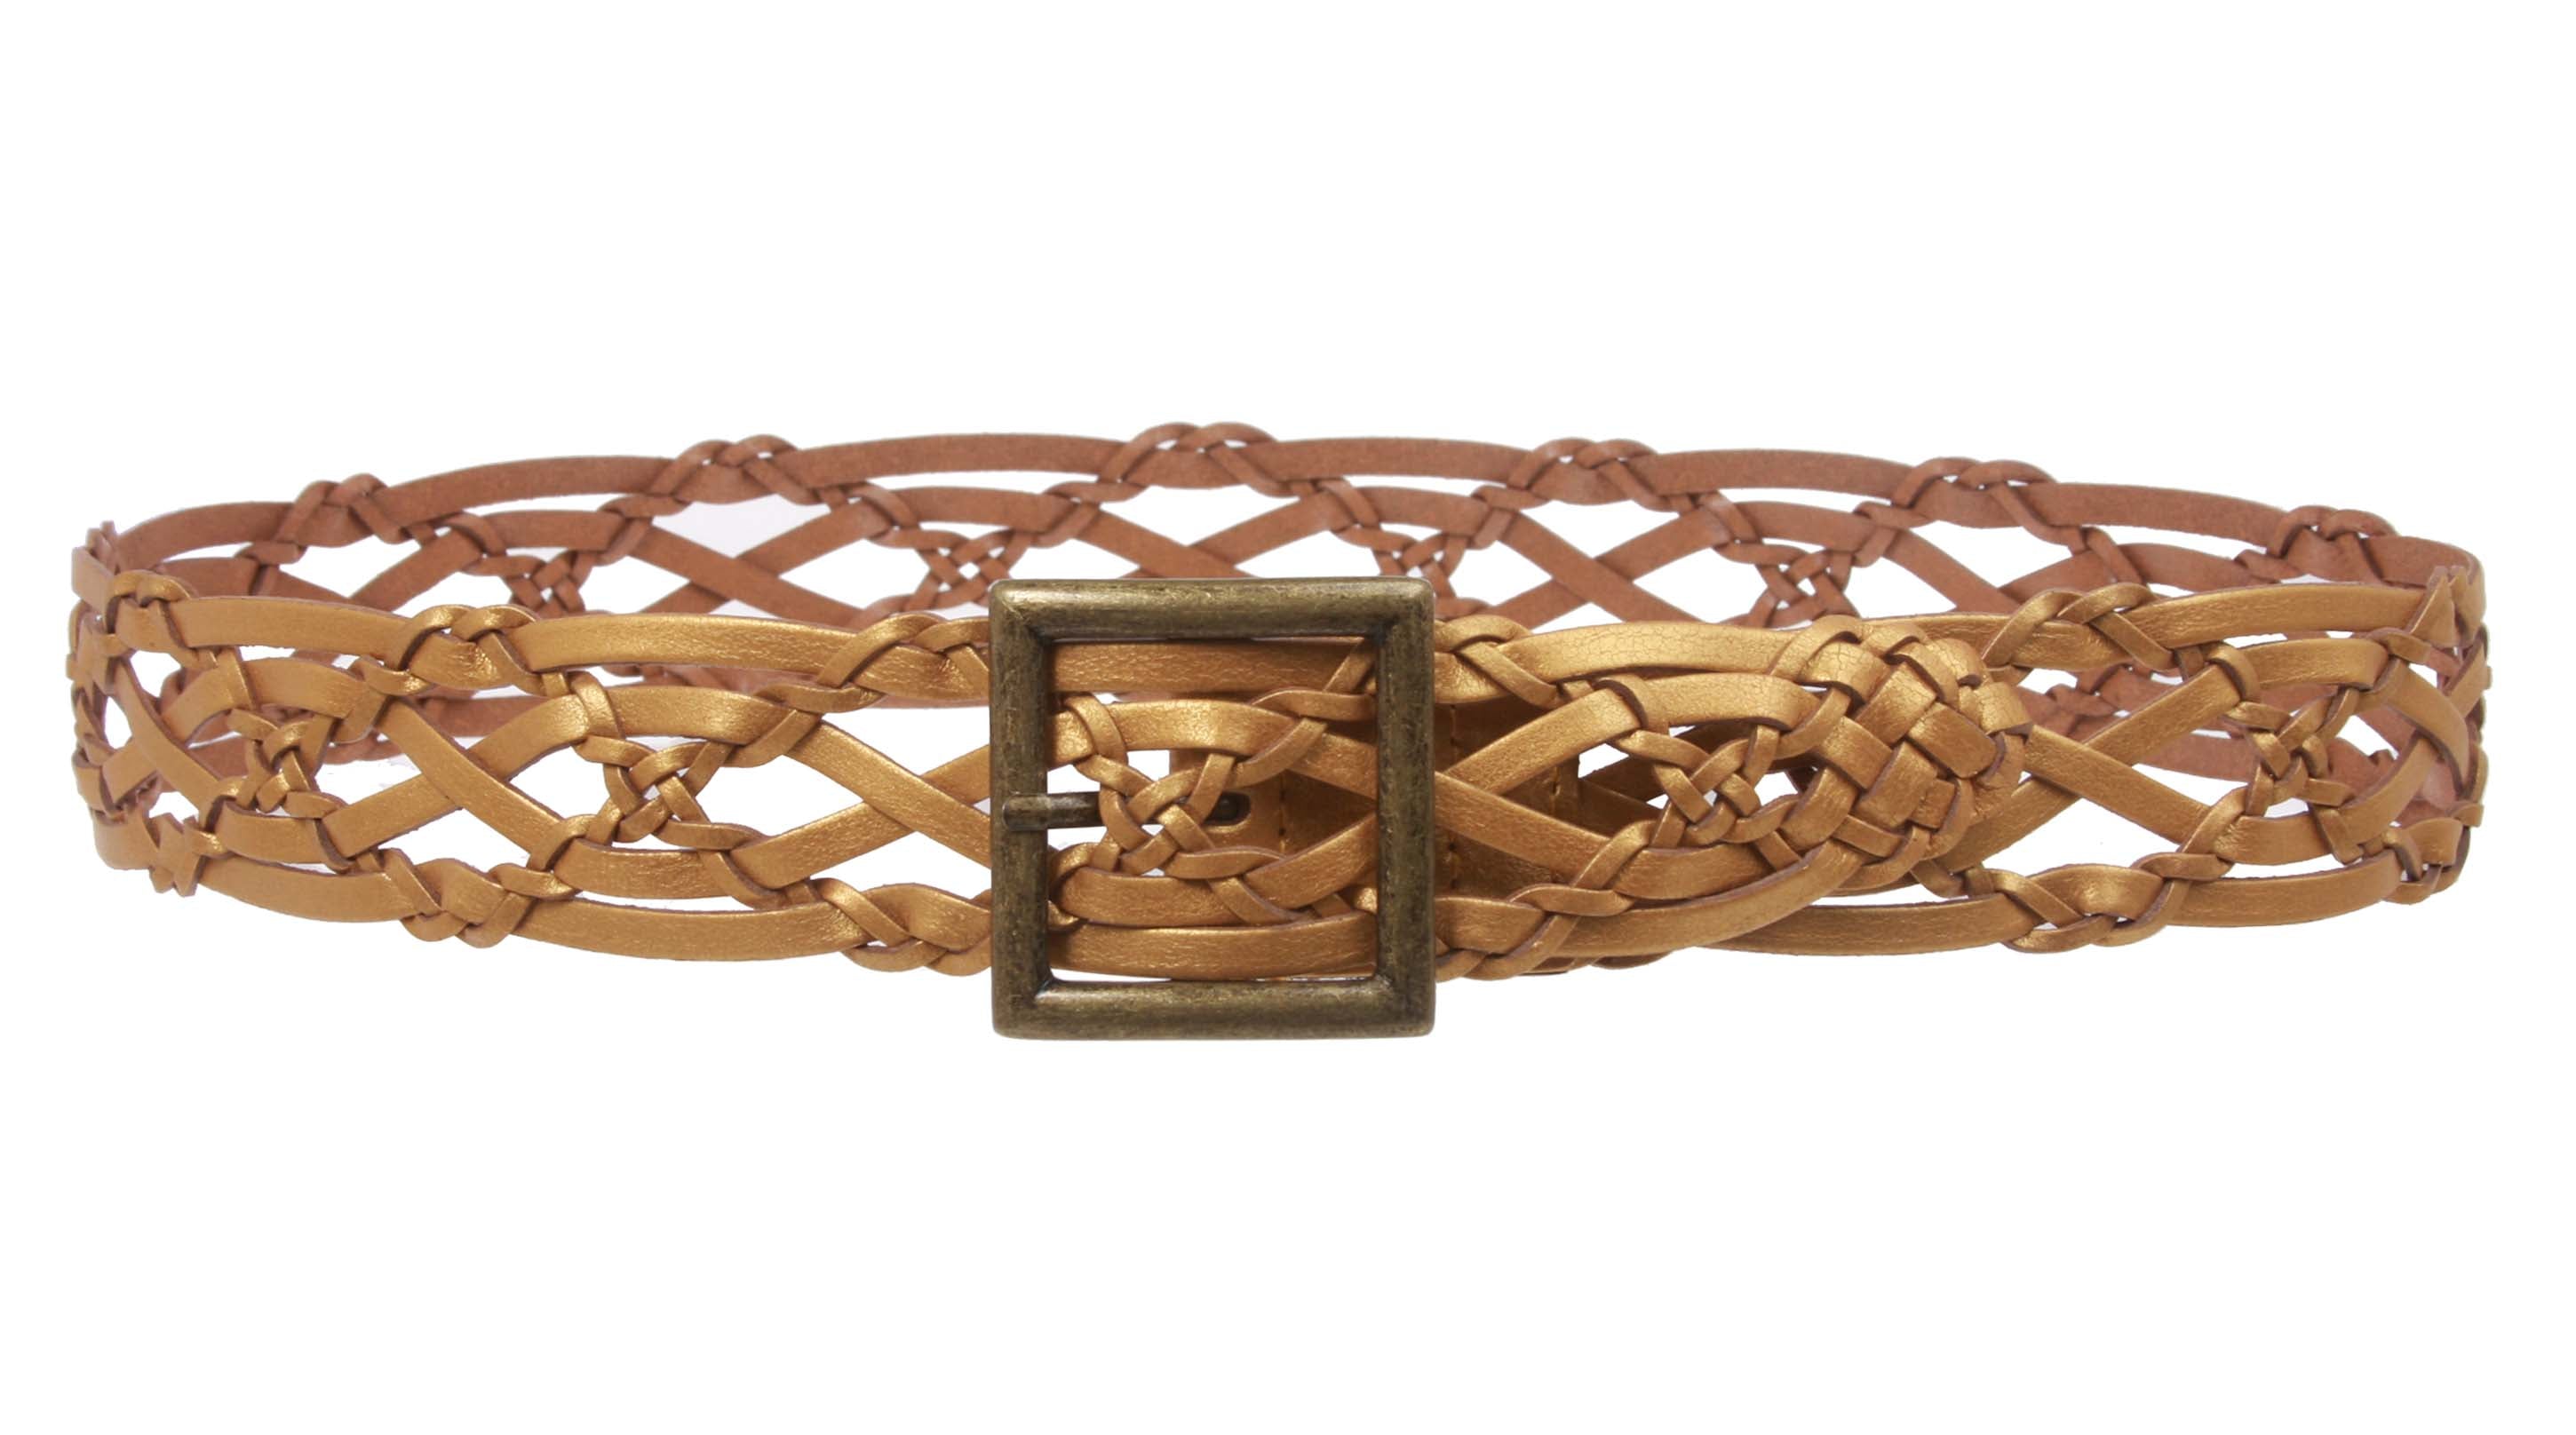 Women's 1 1/2" Braided Woven Leather Square Belt